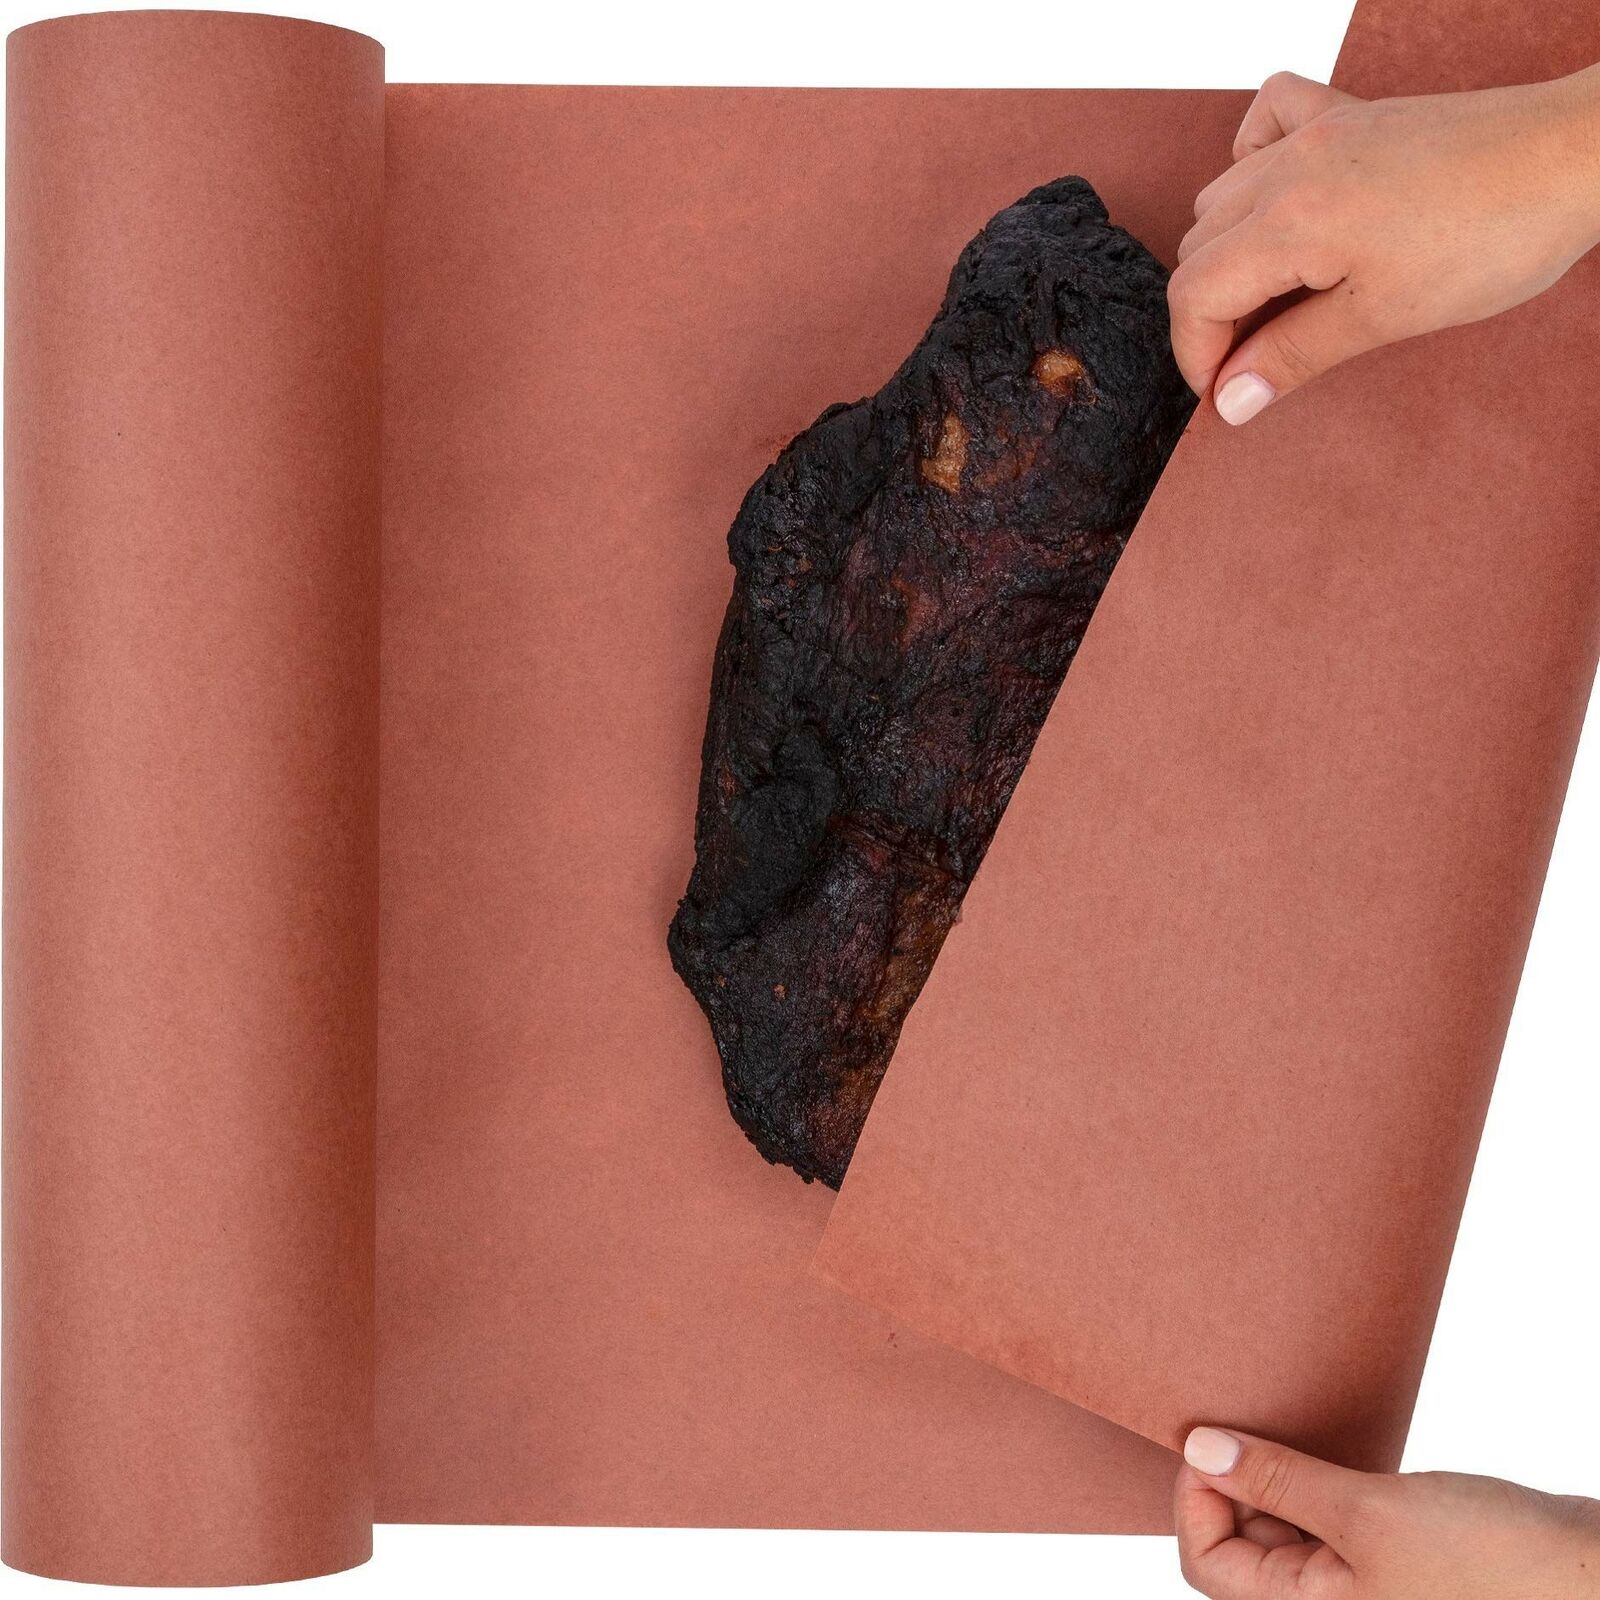 Pink Butcher Paper for Smoking Meat - Peach Butcher Paper Roll 18 by 200 Feet...